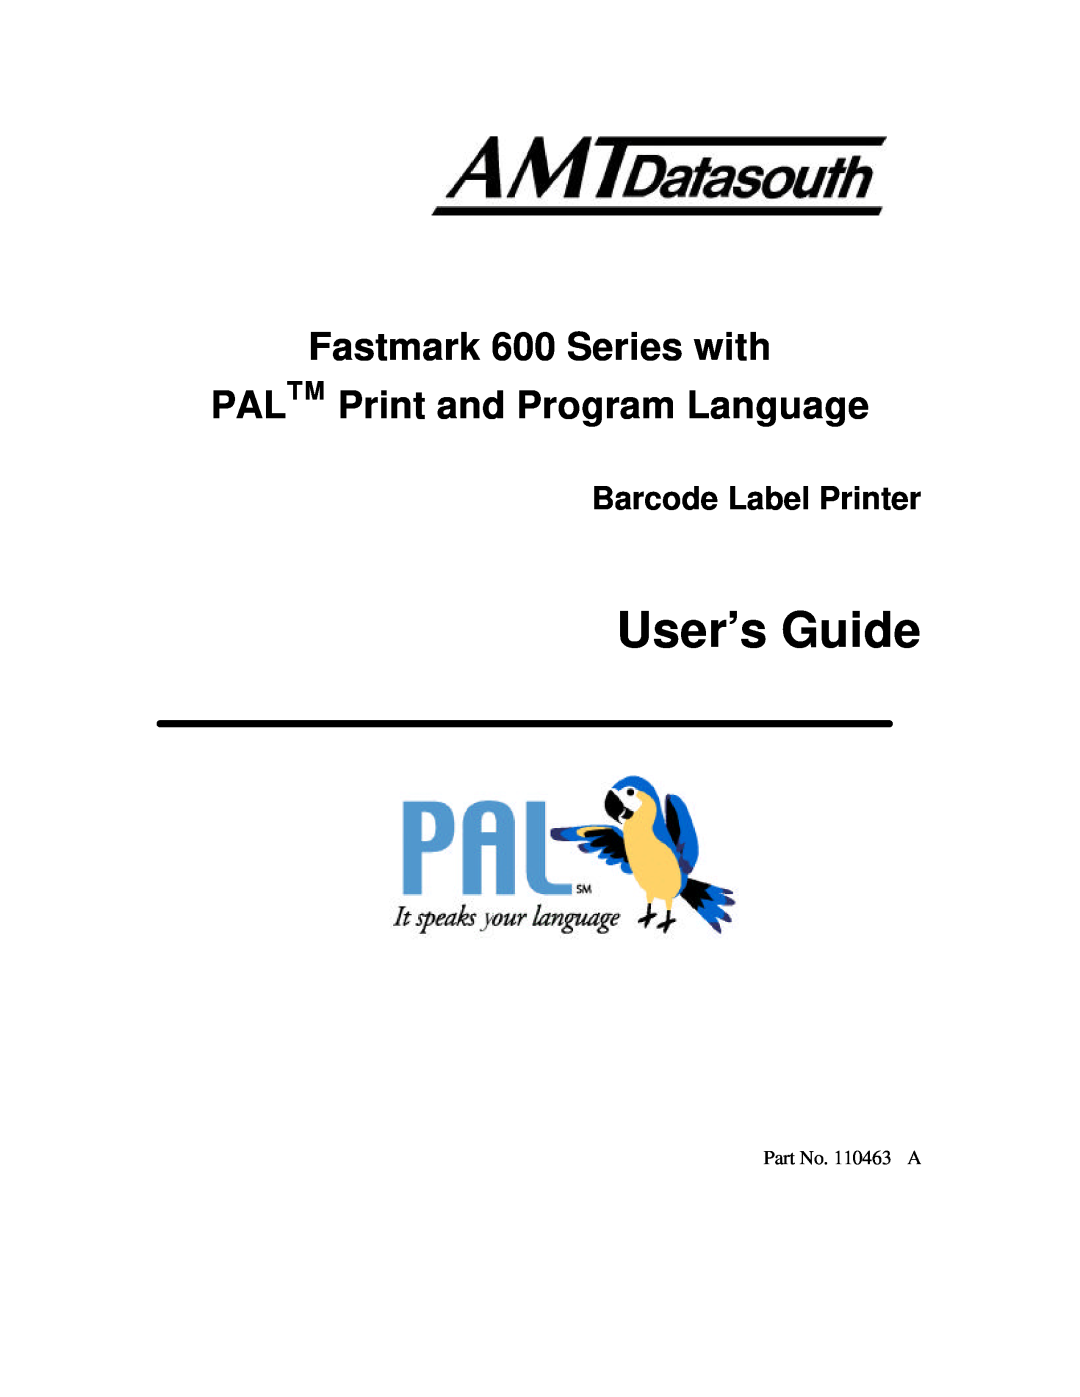 AMT Datasouth manual User’s Guide, Fastmark 600 Series with PALTM Print and Program Language, Barcode Label Printer 